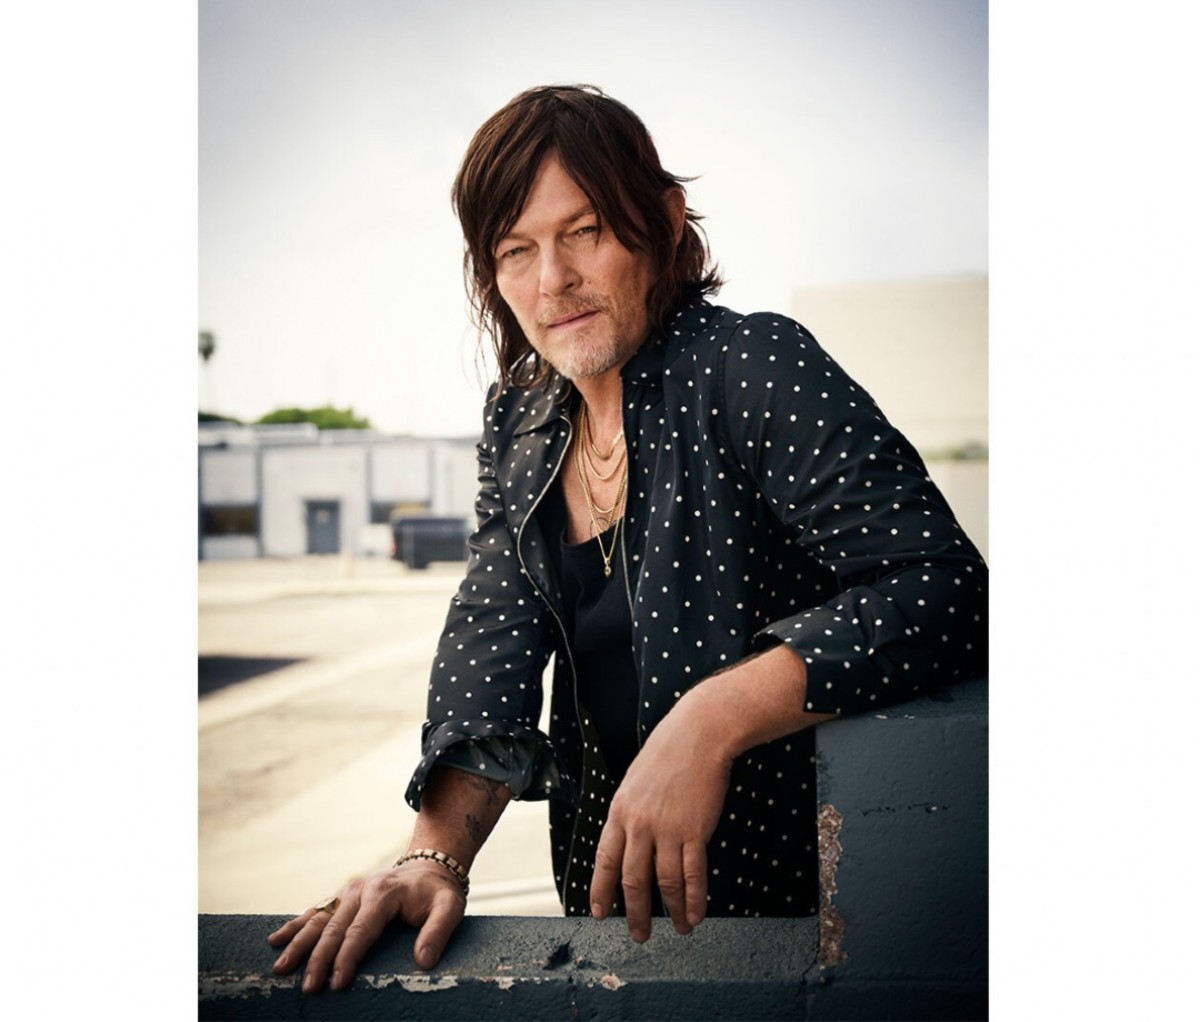 Norman Reedus on moving past his role on The Walking Dead.